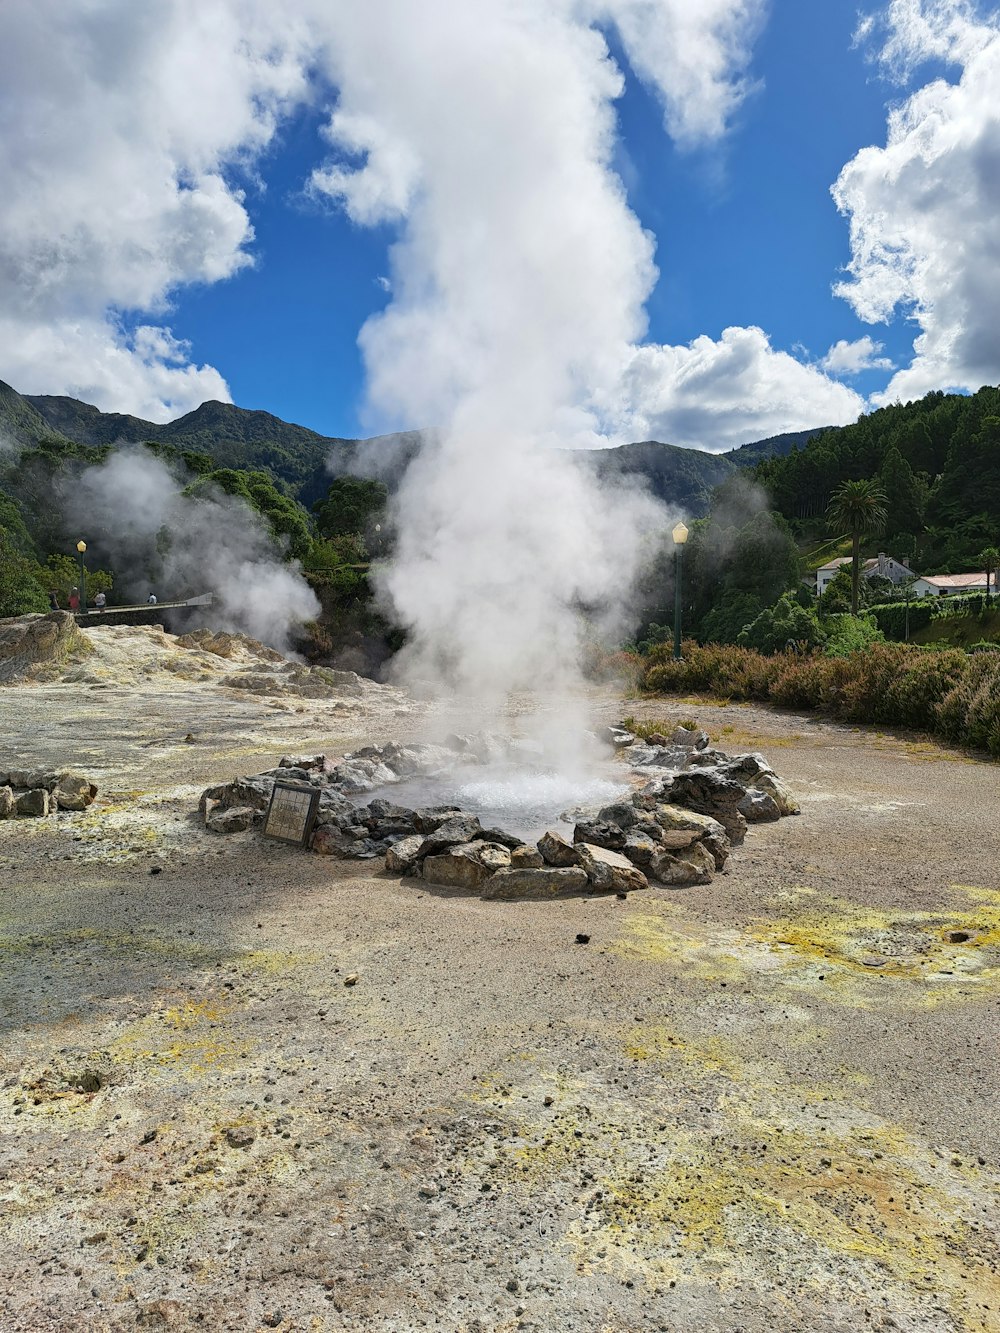 a large geyser in a rocky area